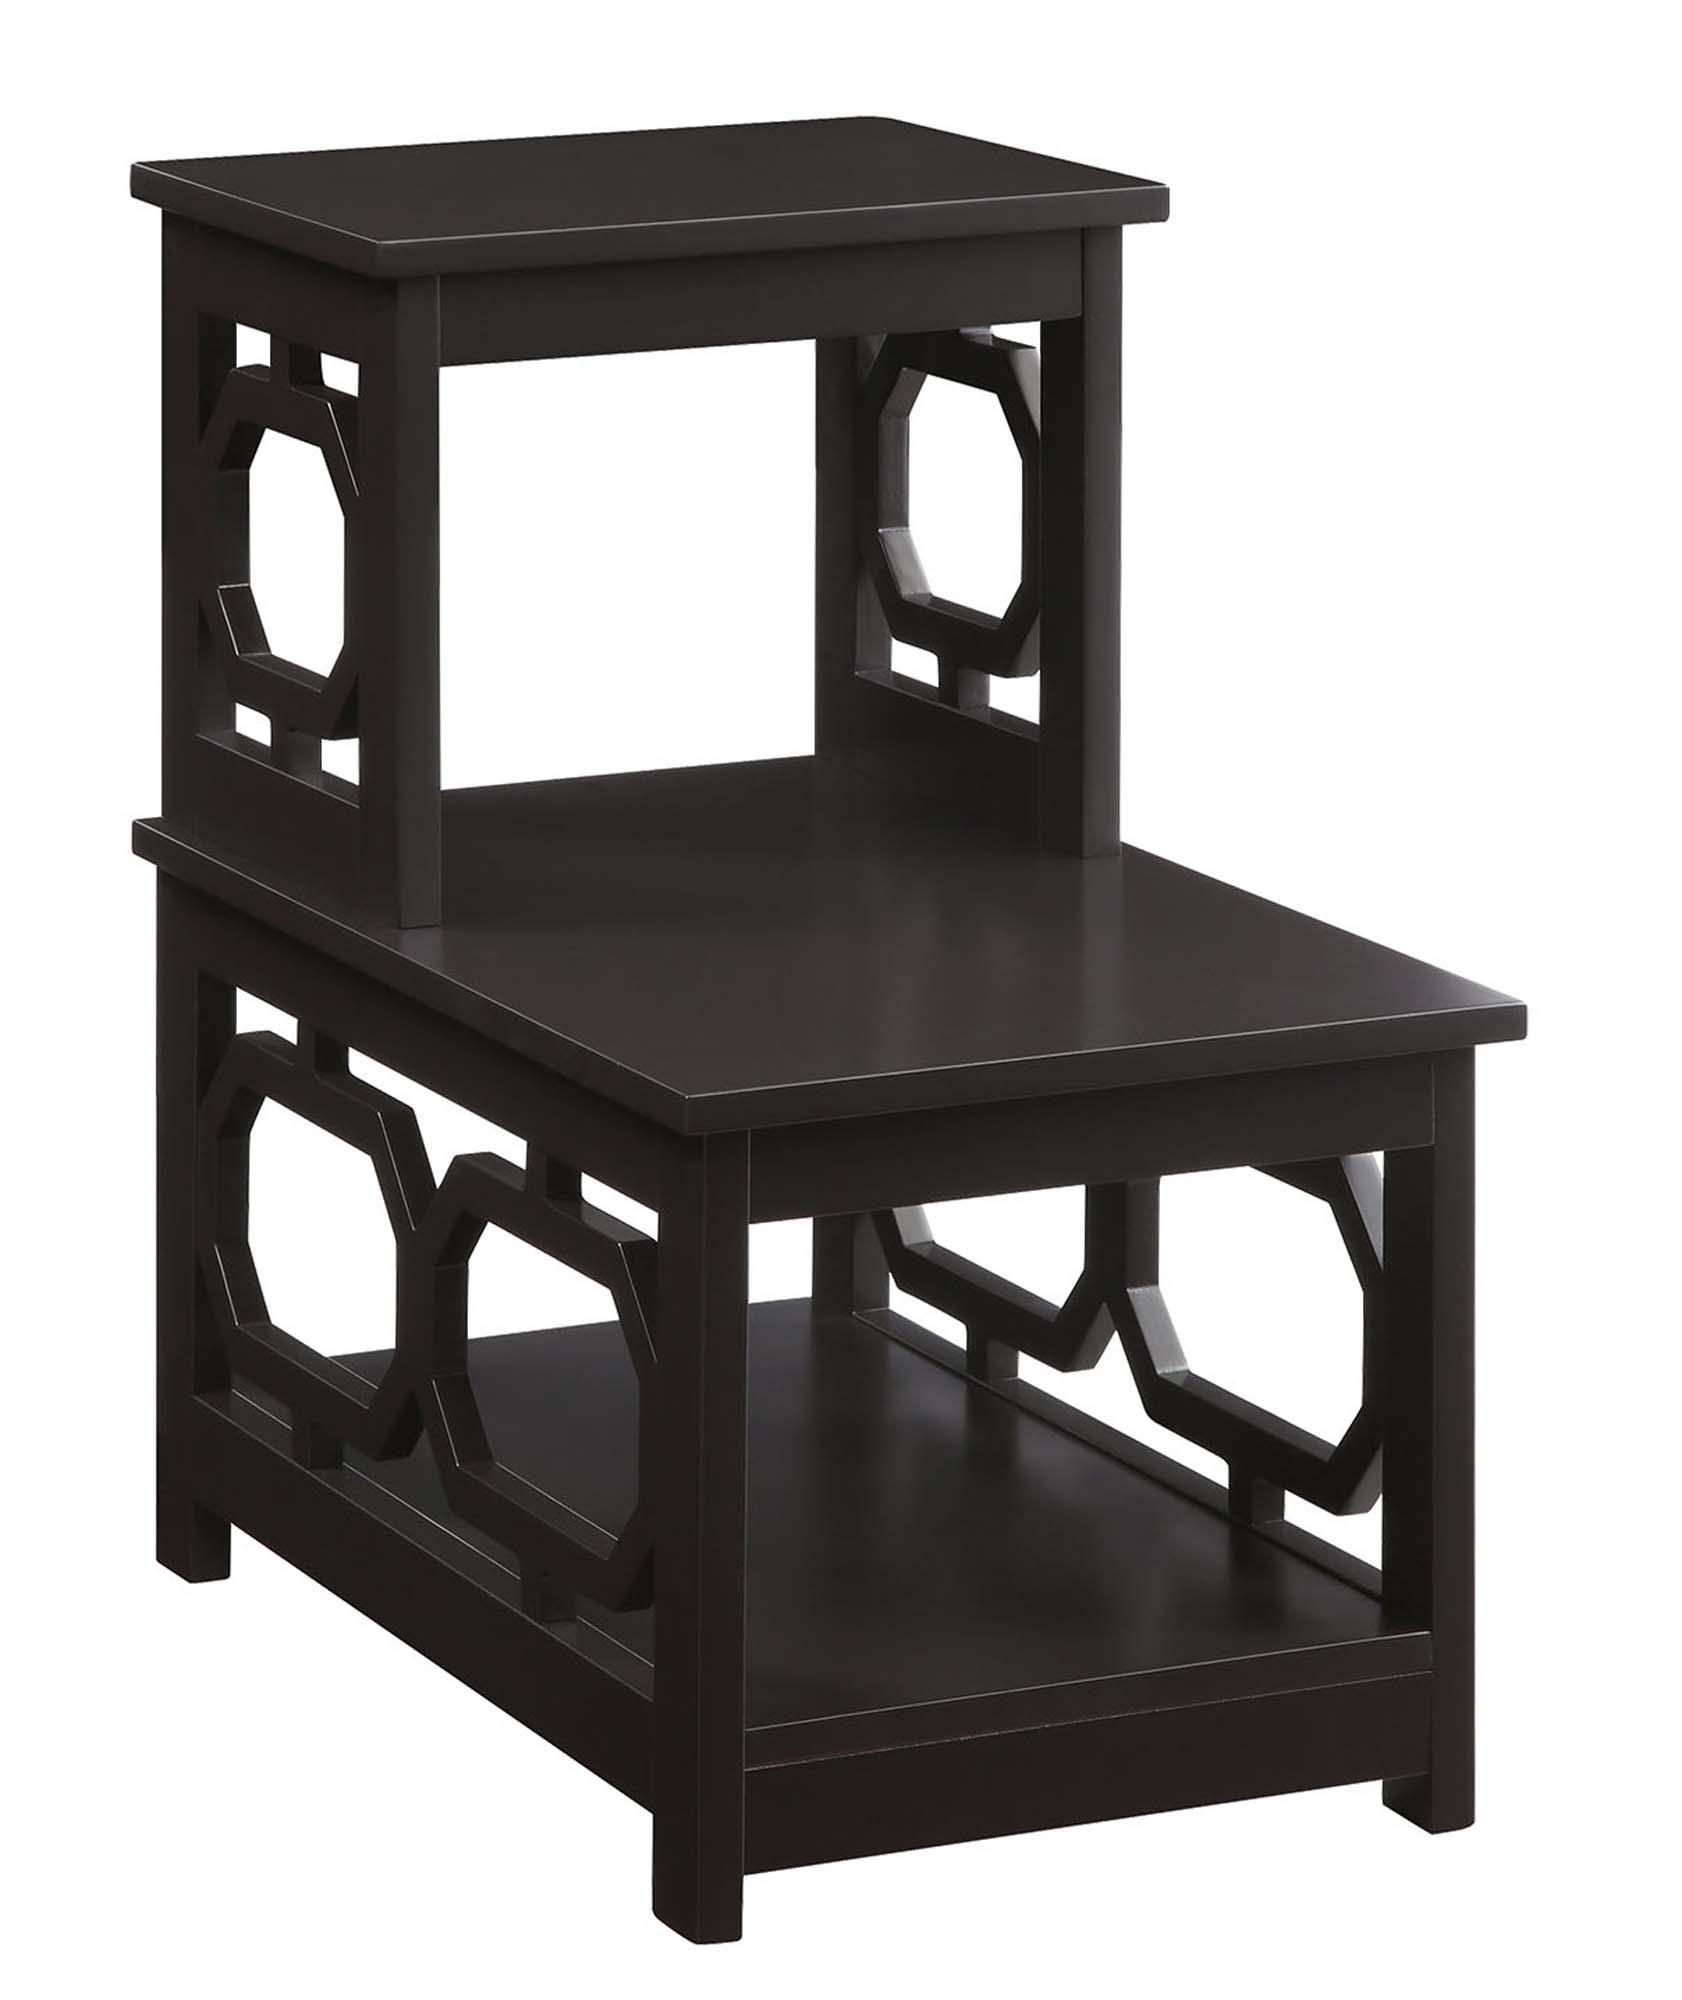 Convenience Concepts Omega 2 Step Chairside End Table, Multiple Finishes - image 3 of 3